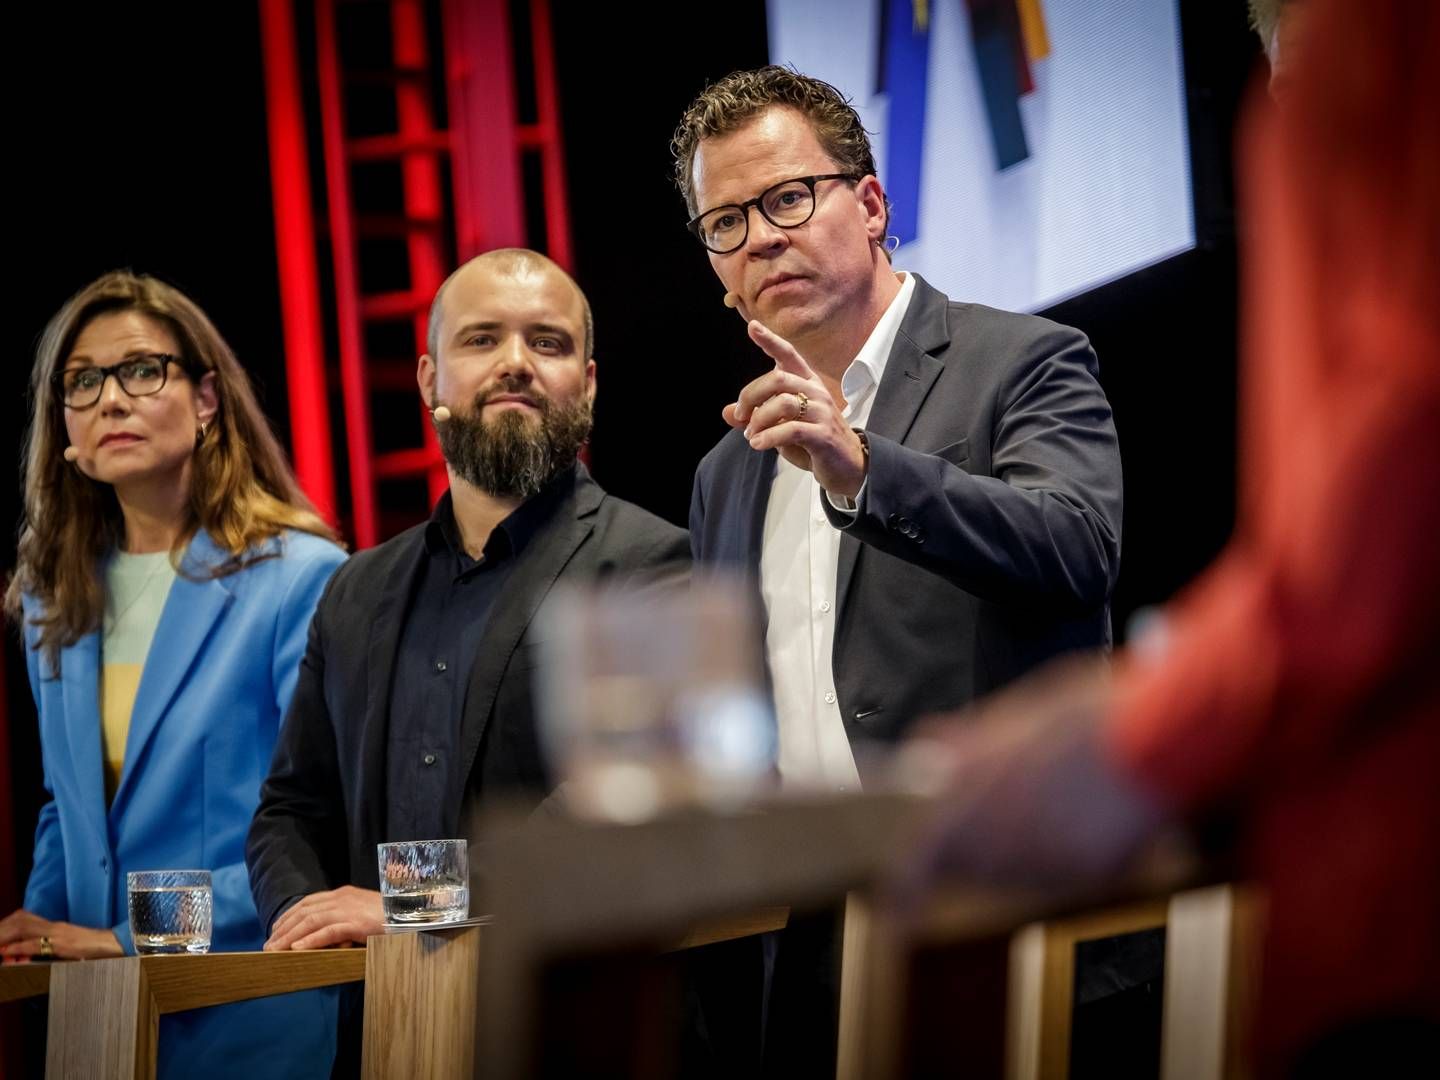 Members of the European Parliament Pernille Weiss (left) and Morten Helveg Petersen (right) hope that the government will step up to the plate so that Denmark can take on the responsibility for control. (ARCHIVE) | Photo: Mads Nissen